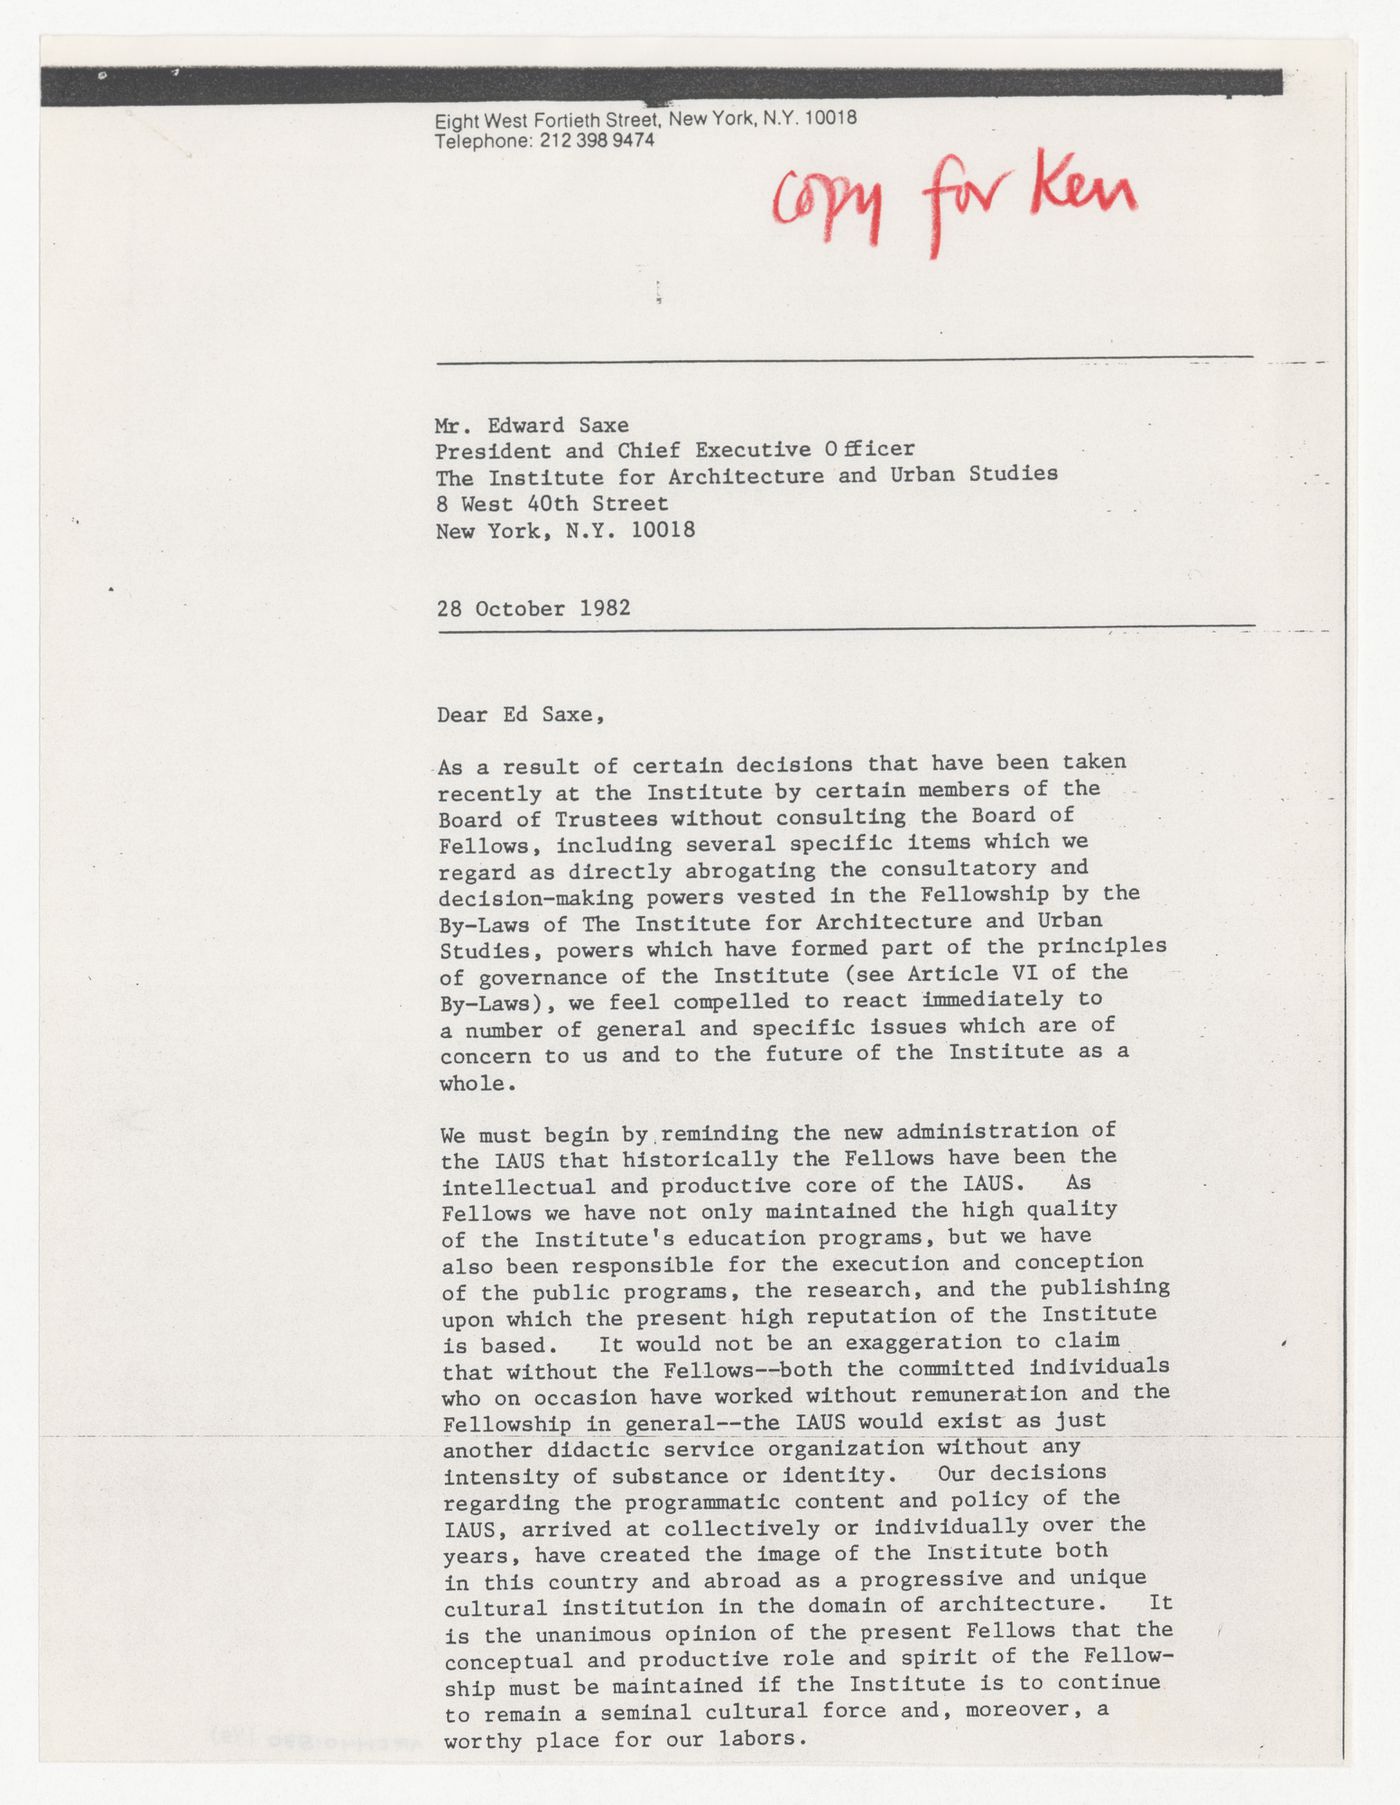 Letter from Kenneth Frampton to Edward L. Saxe about the role of IAUS Fellows